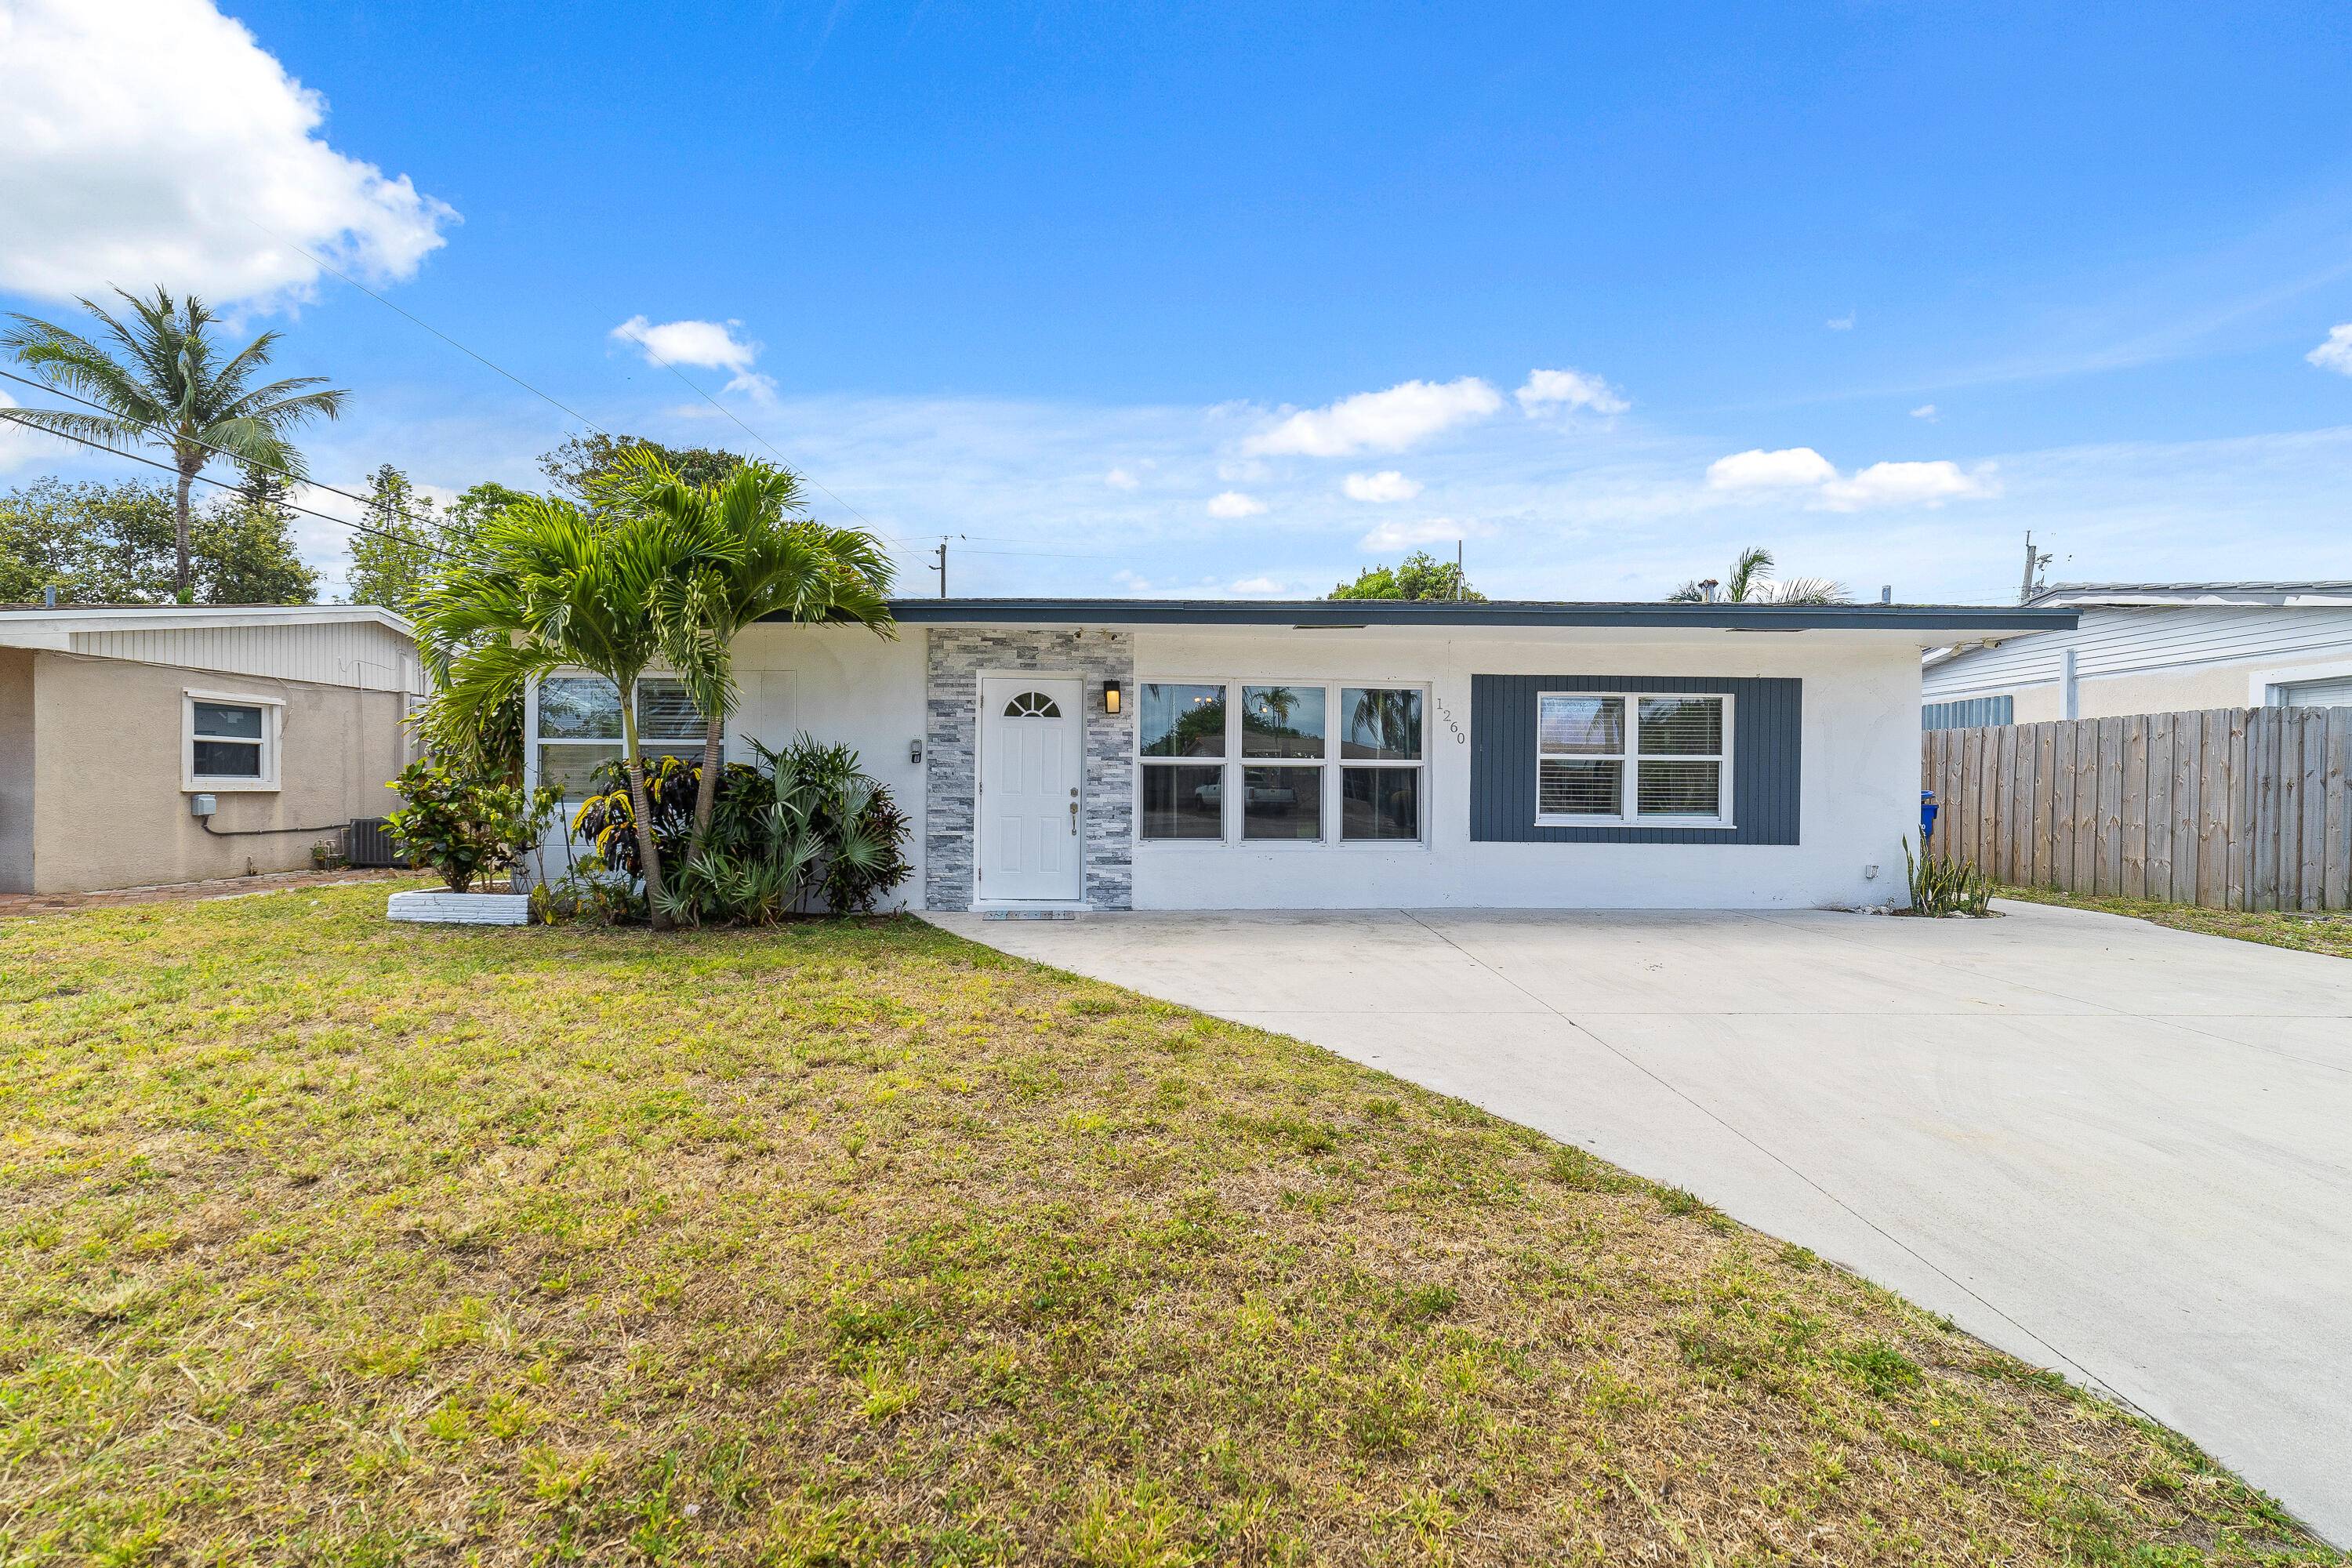 Welcome to this completely renovated home boasting a desirable split floor plan featuring 3 bedrooms and 2 bathrooms, all adorned with elegant porcelain tile flooring.